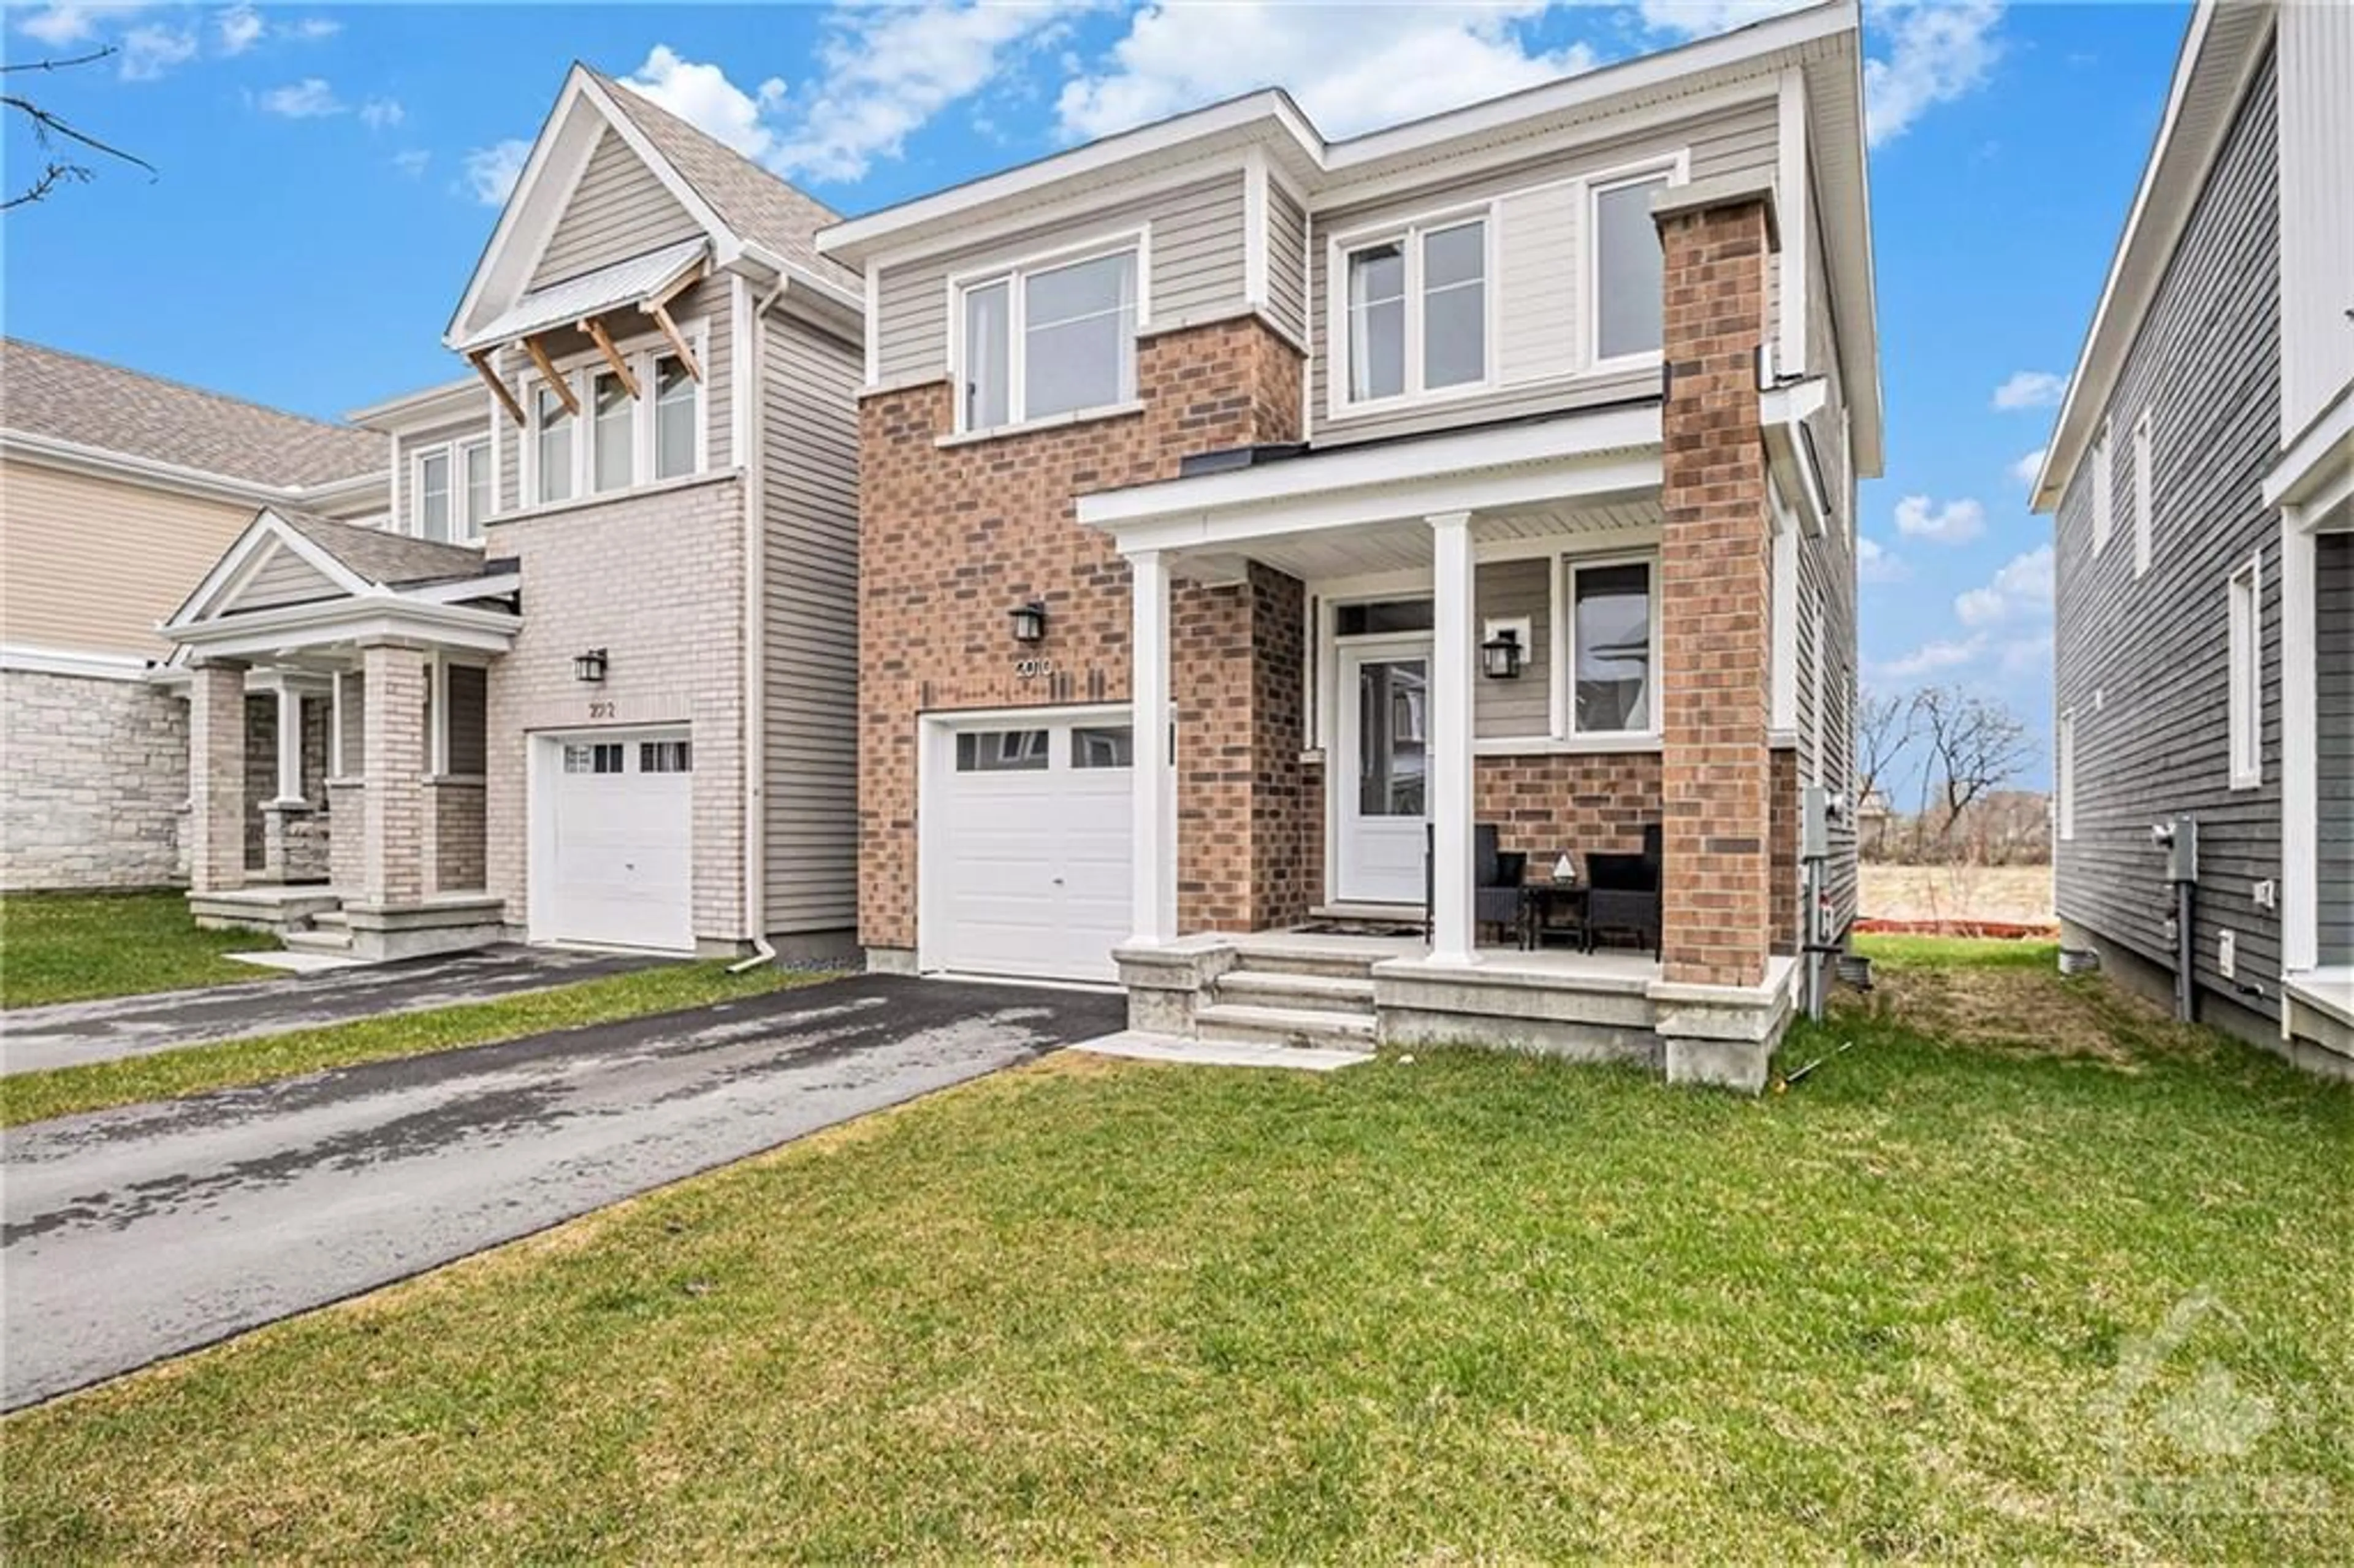 Home with brick exterior material for 2010 POSTILION St, Richmond Ontario K0A 2Z0